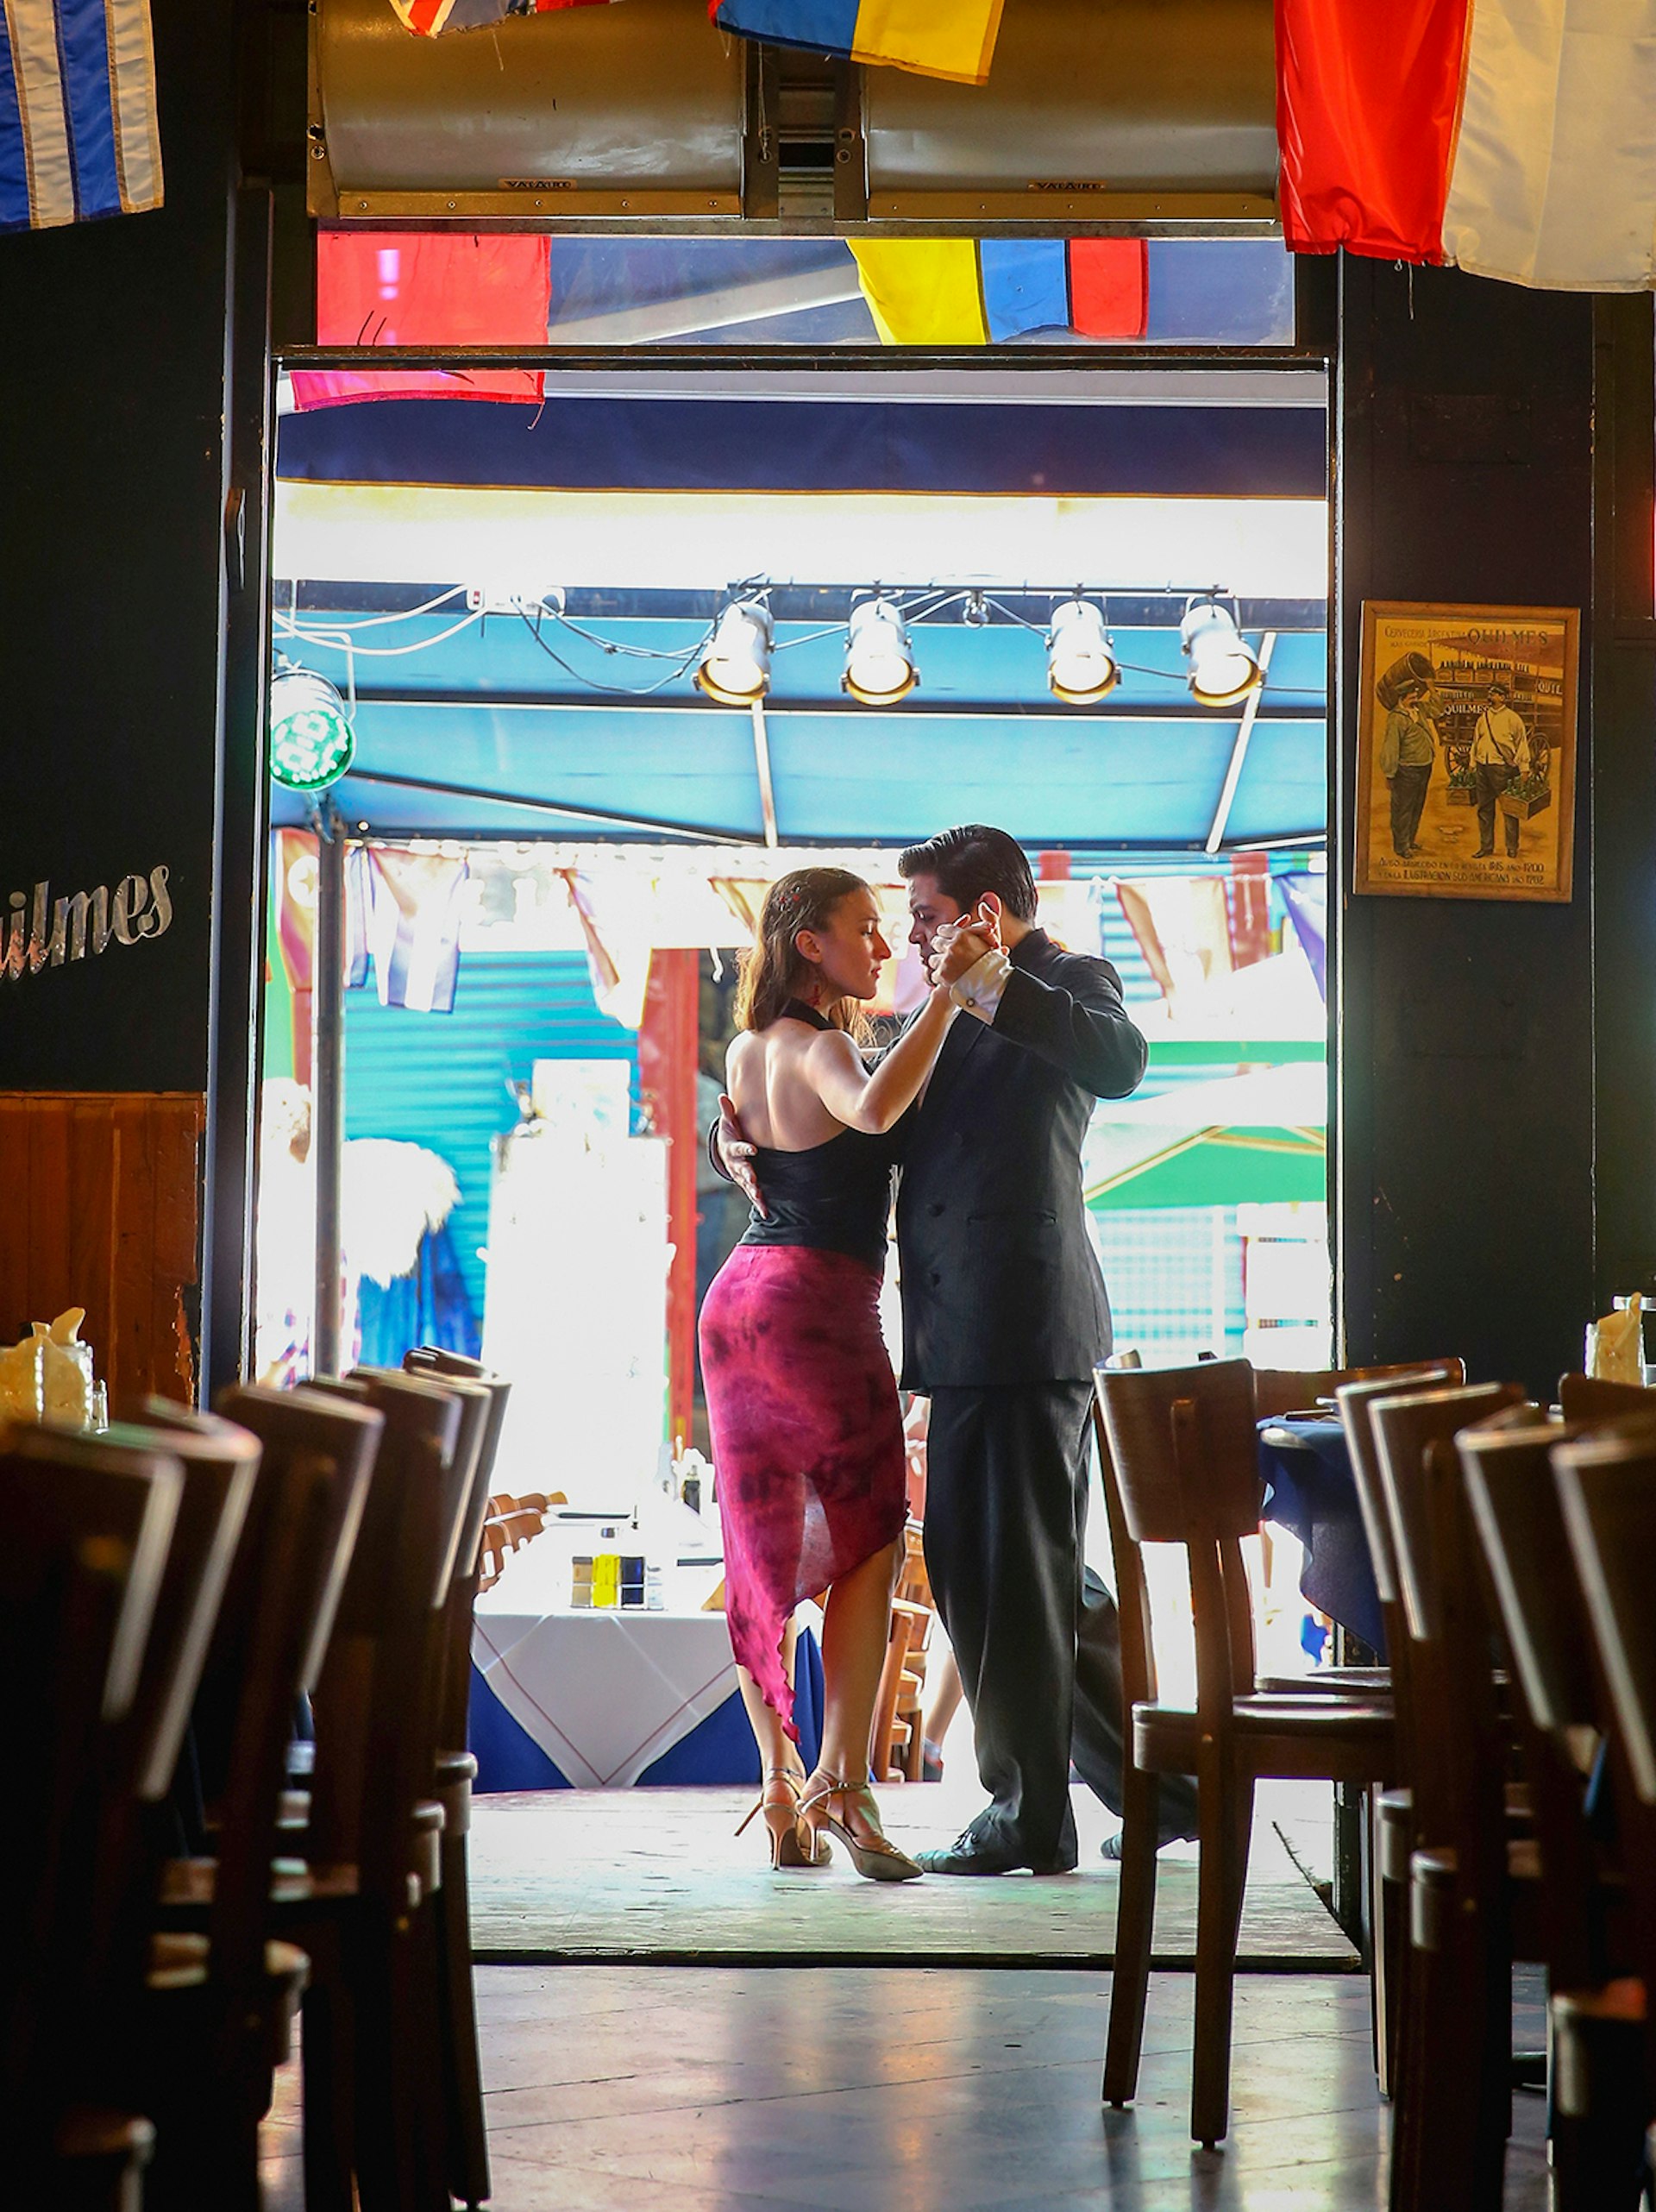 Two people dance in a doorway at La Boca in Buenos Aires, Argentina